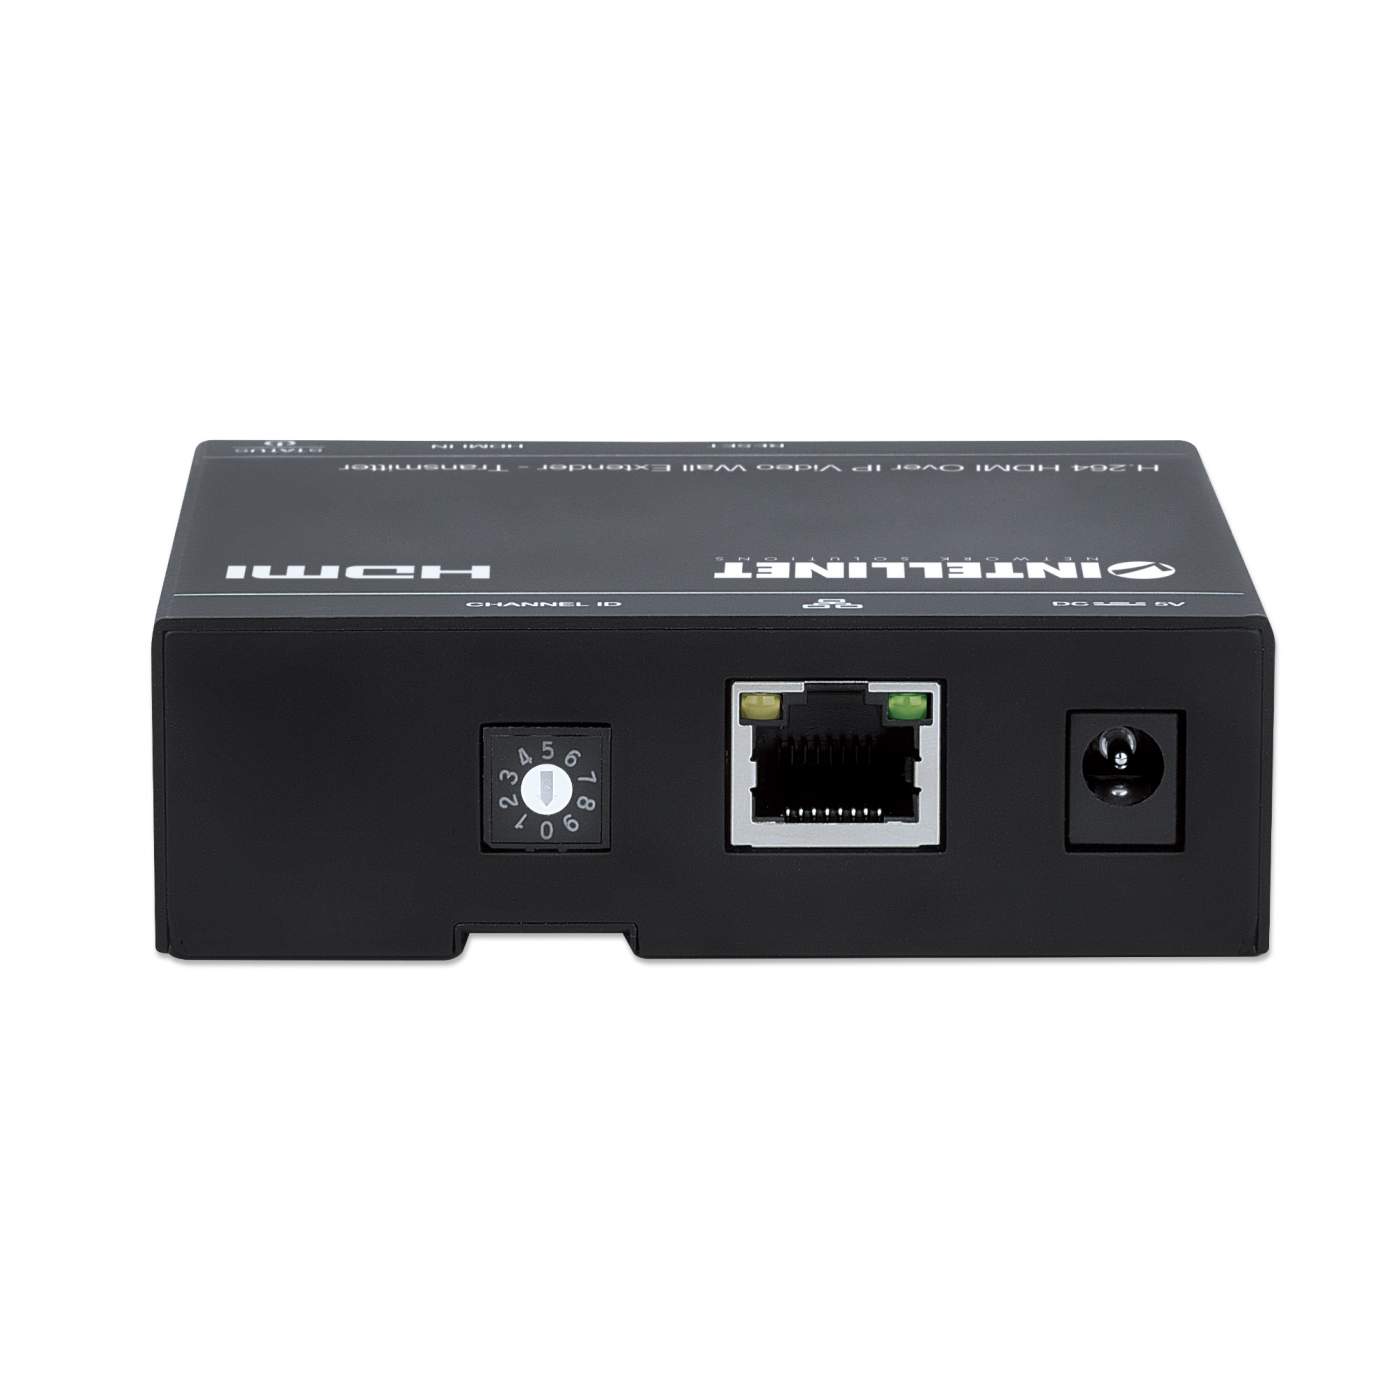 H.264 HDMI Over IP Video Wall Extender - Transmitter Image 6